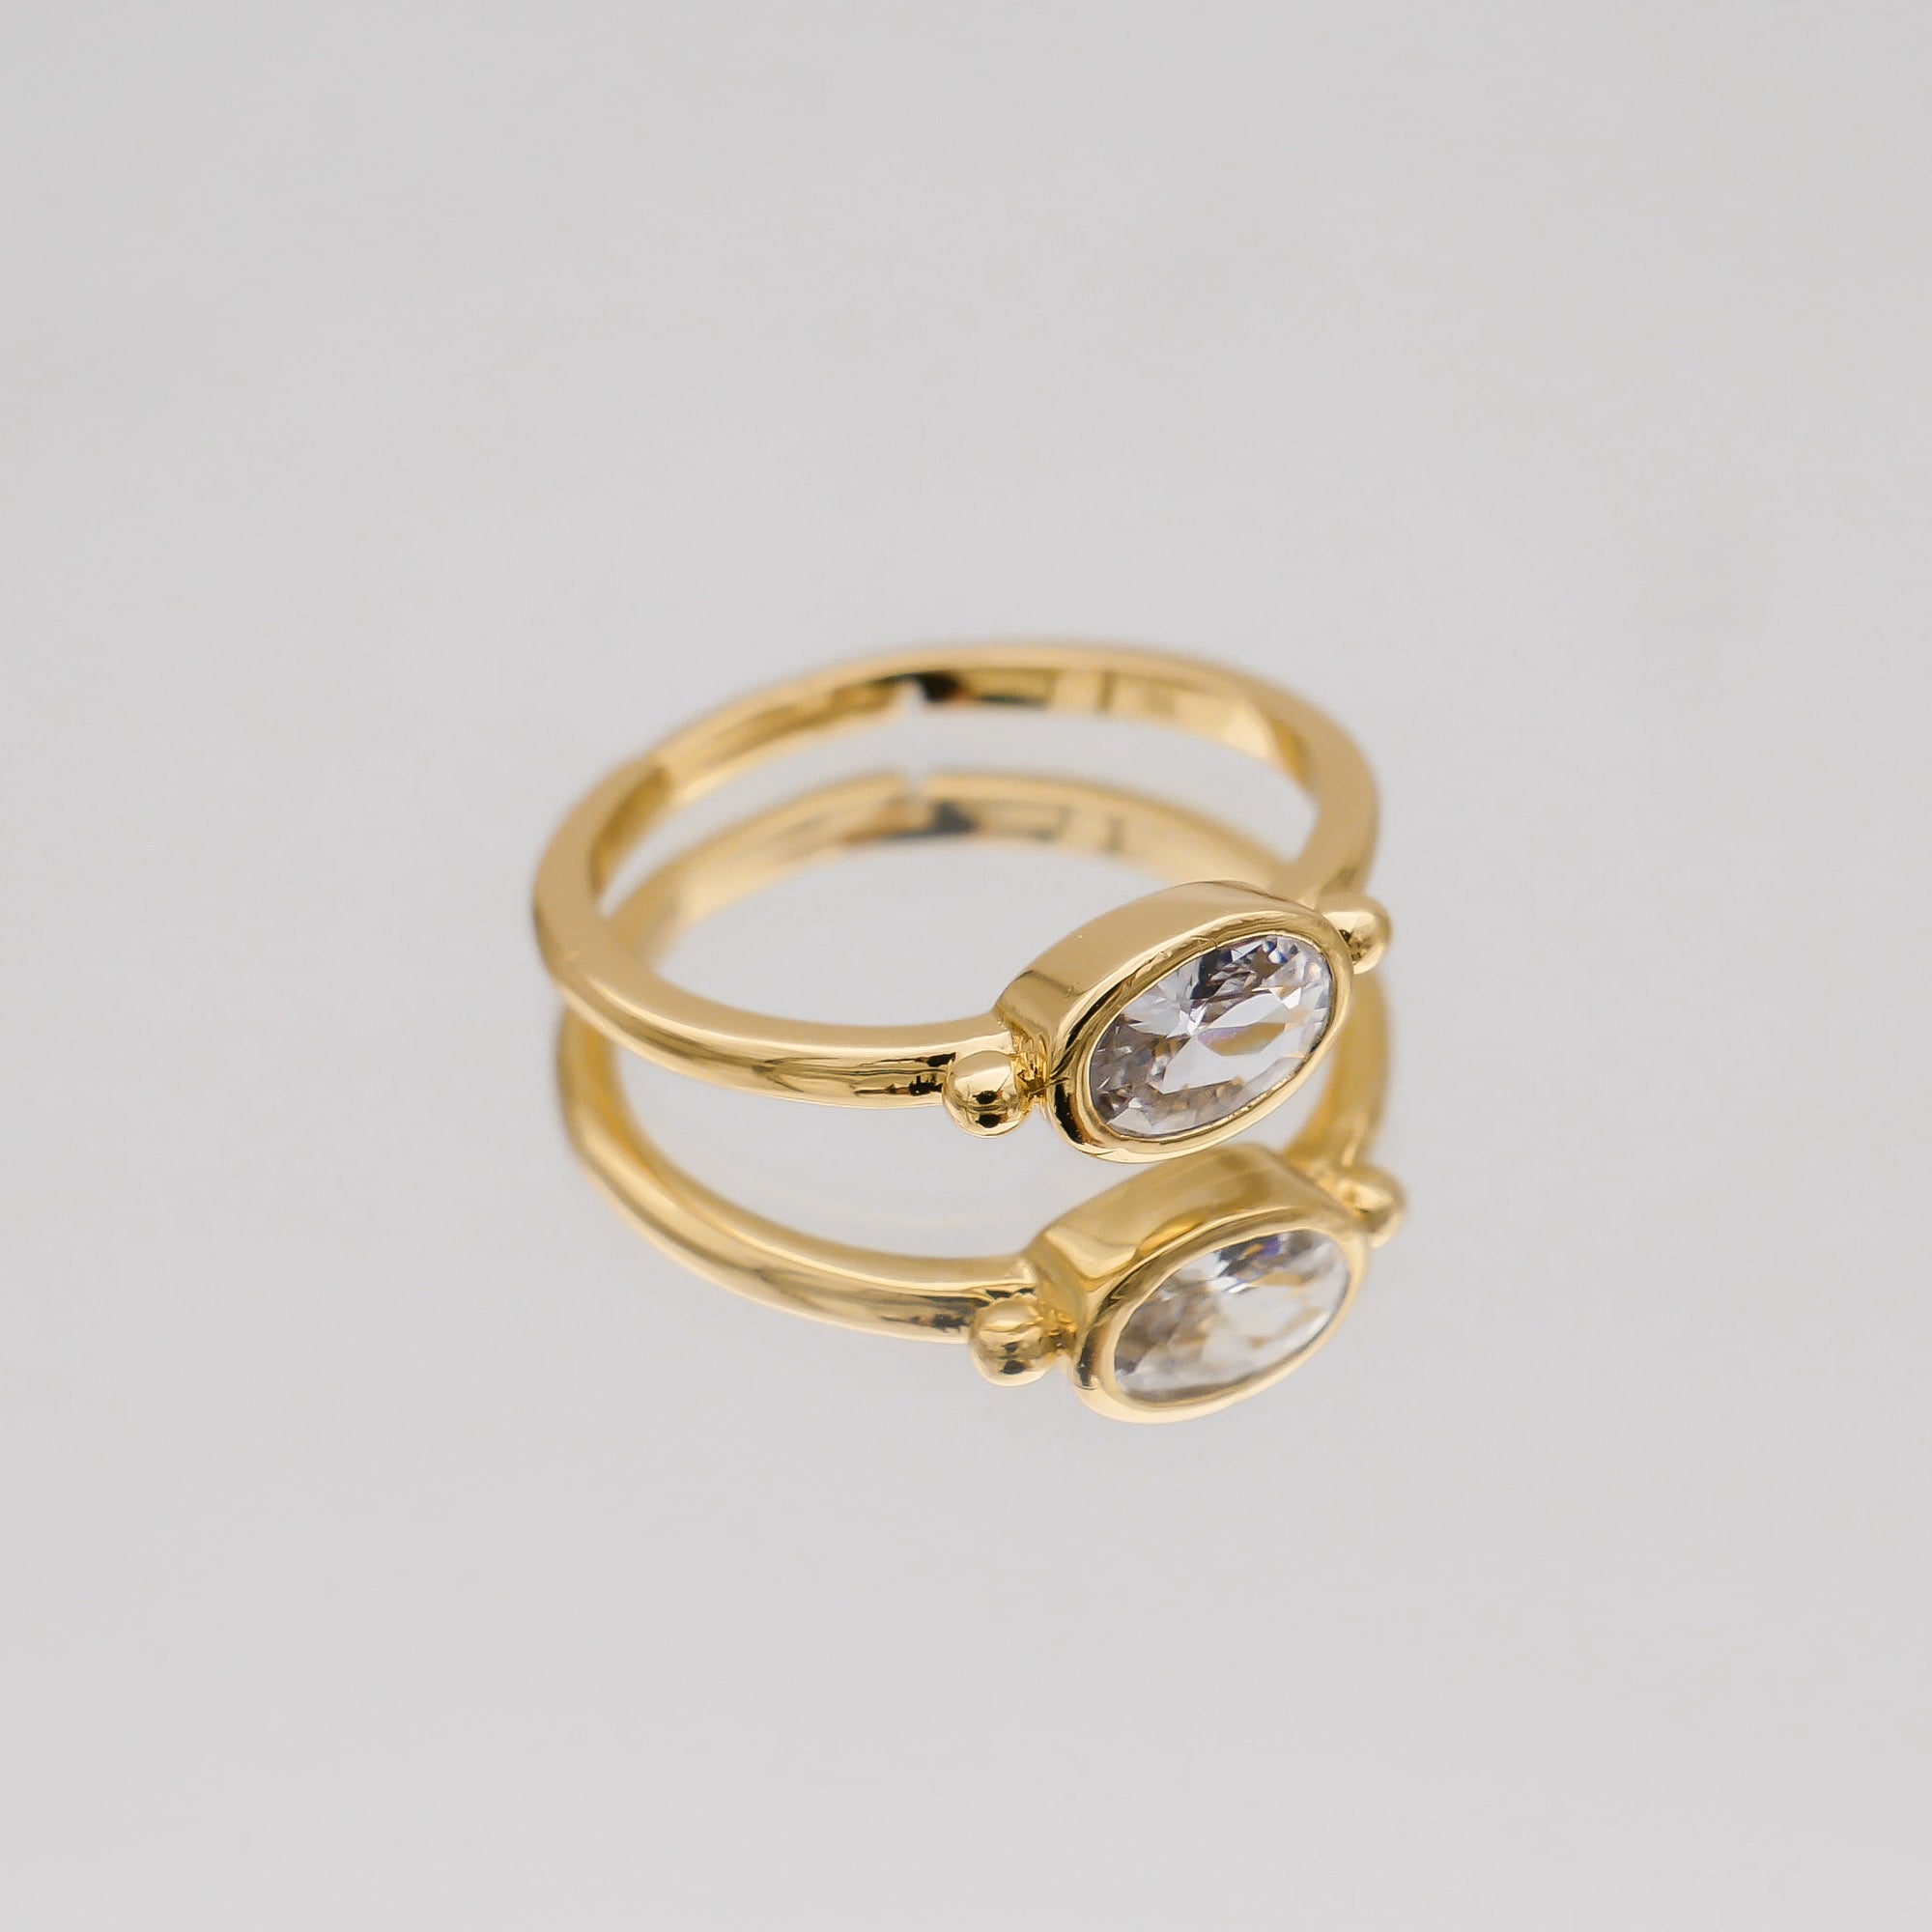 Birthstone ring gold for April